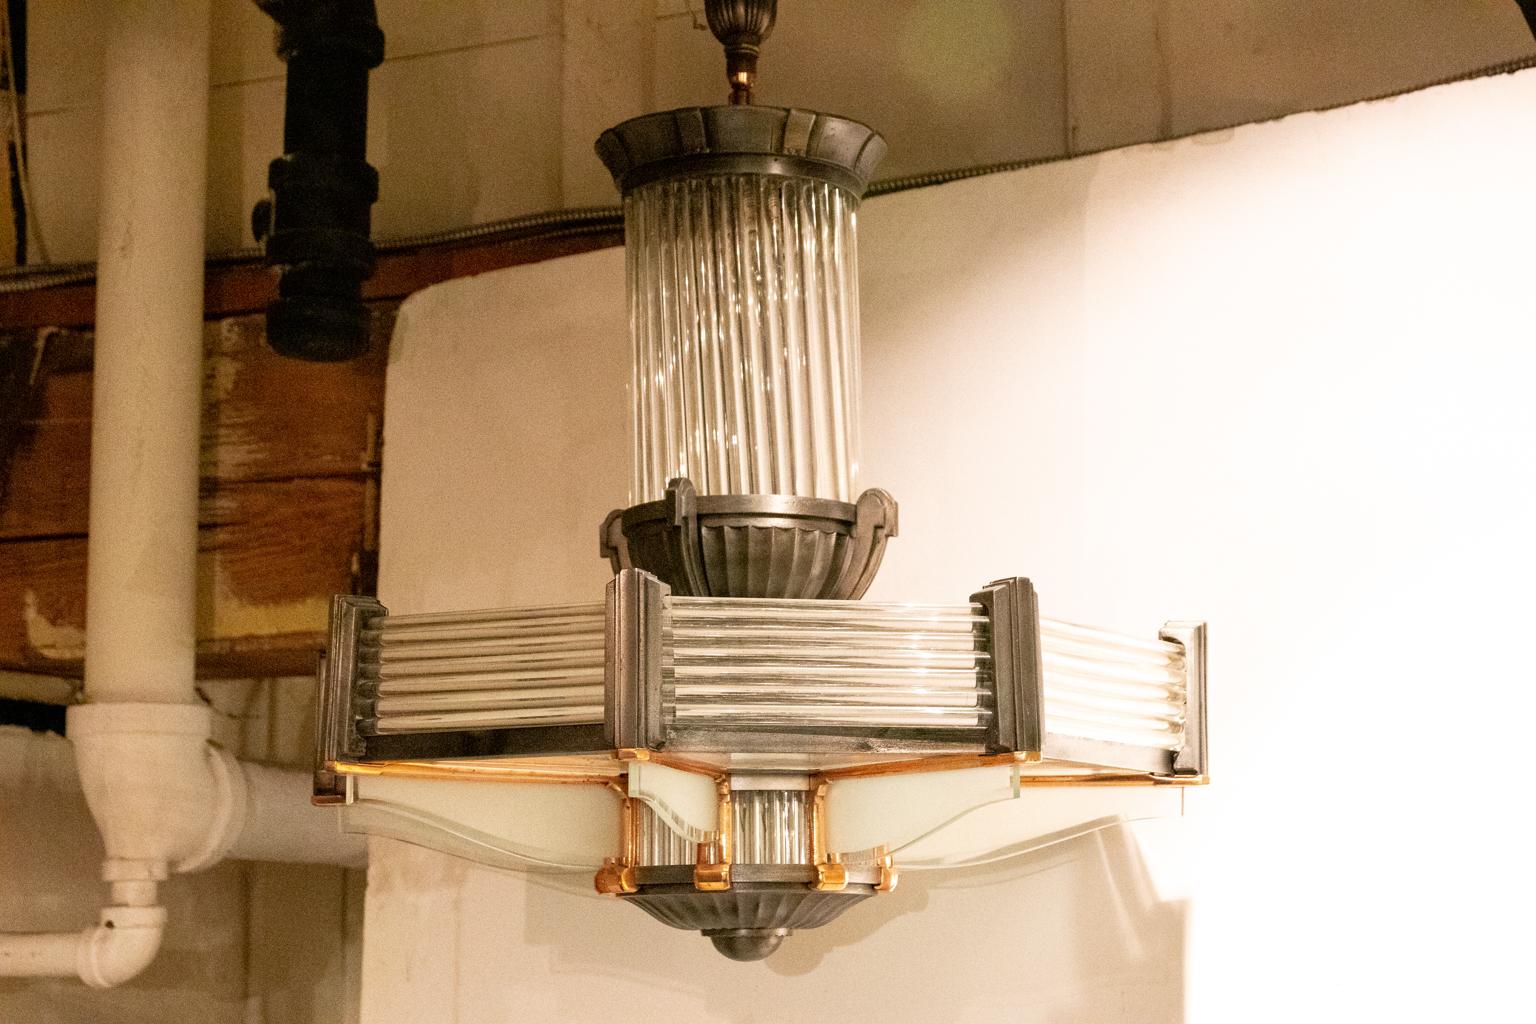 Art Deco style chandelier, circa 1930s. The frame is composed of copper and chrome holds along with glass rods that form a geometric pattern. The lightbulbs are not exposed. Shades not included. Please note of wear consistent with age of the